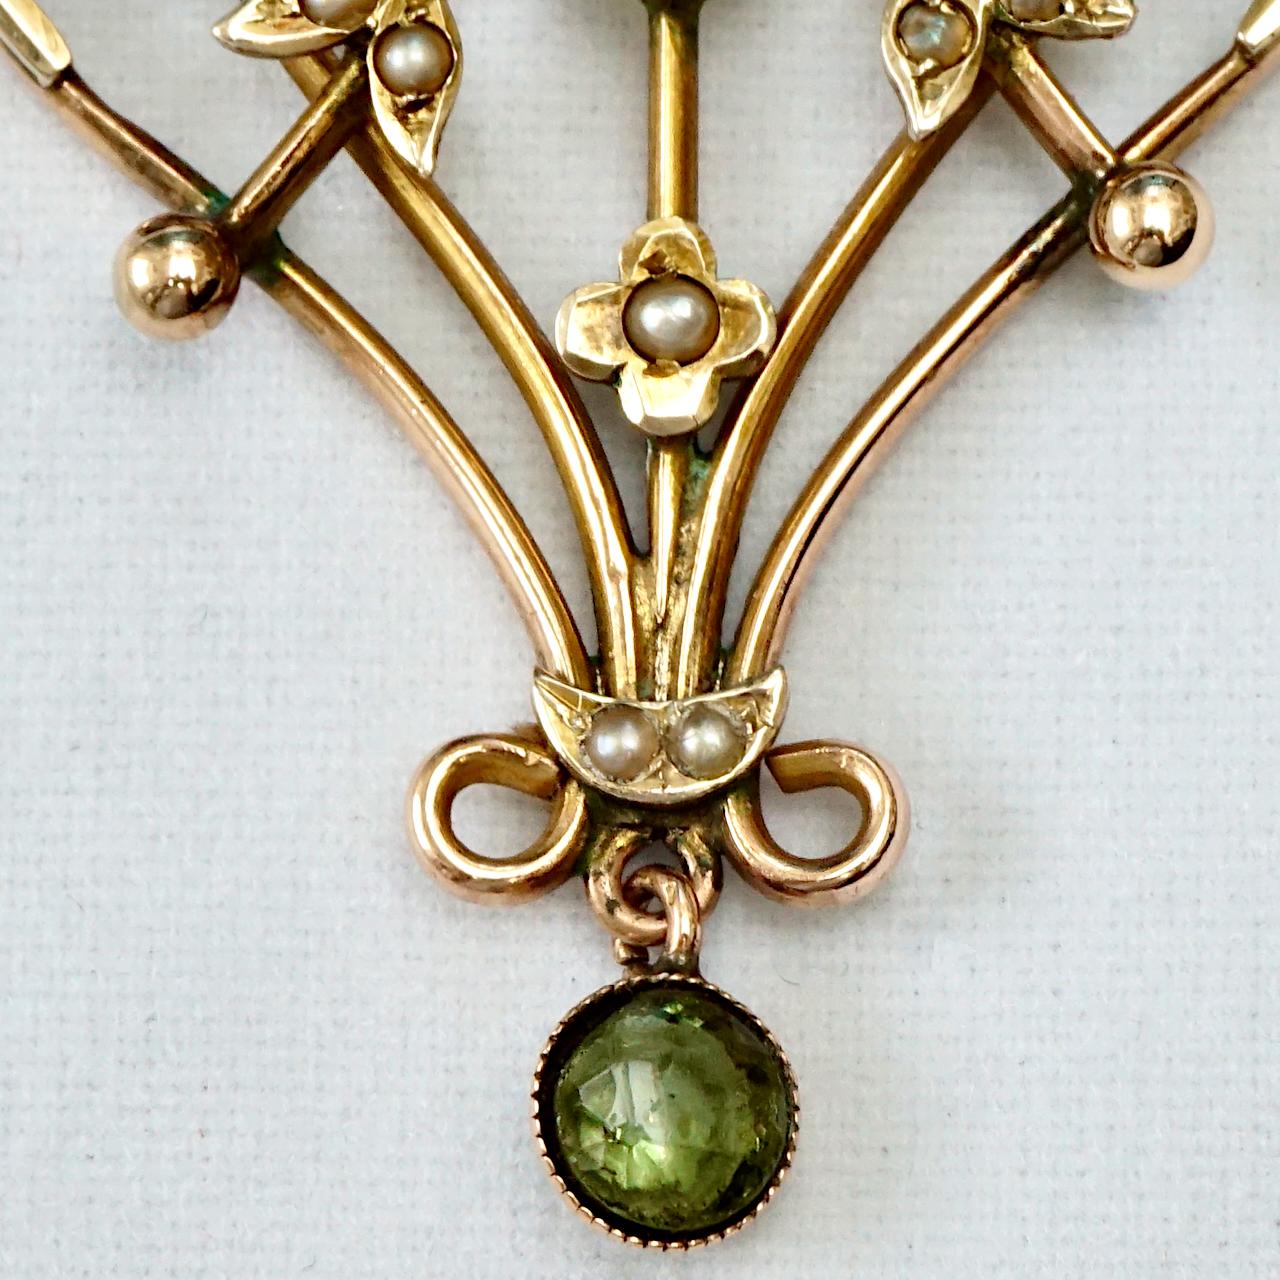 Women's or Men's Art Nouveau 9ct Gold Lavaliere Pendant Peridot Paste and Natural Seed Pearls For Sale